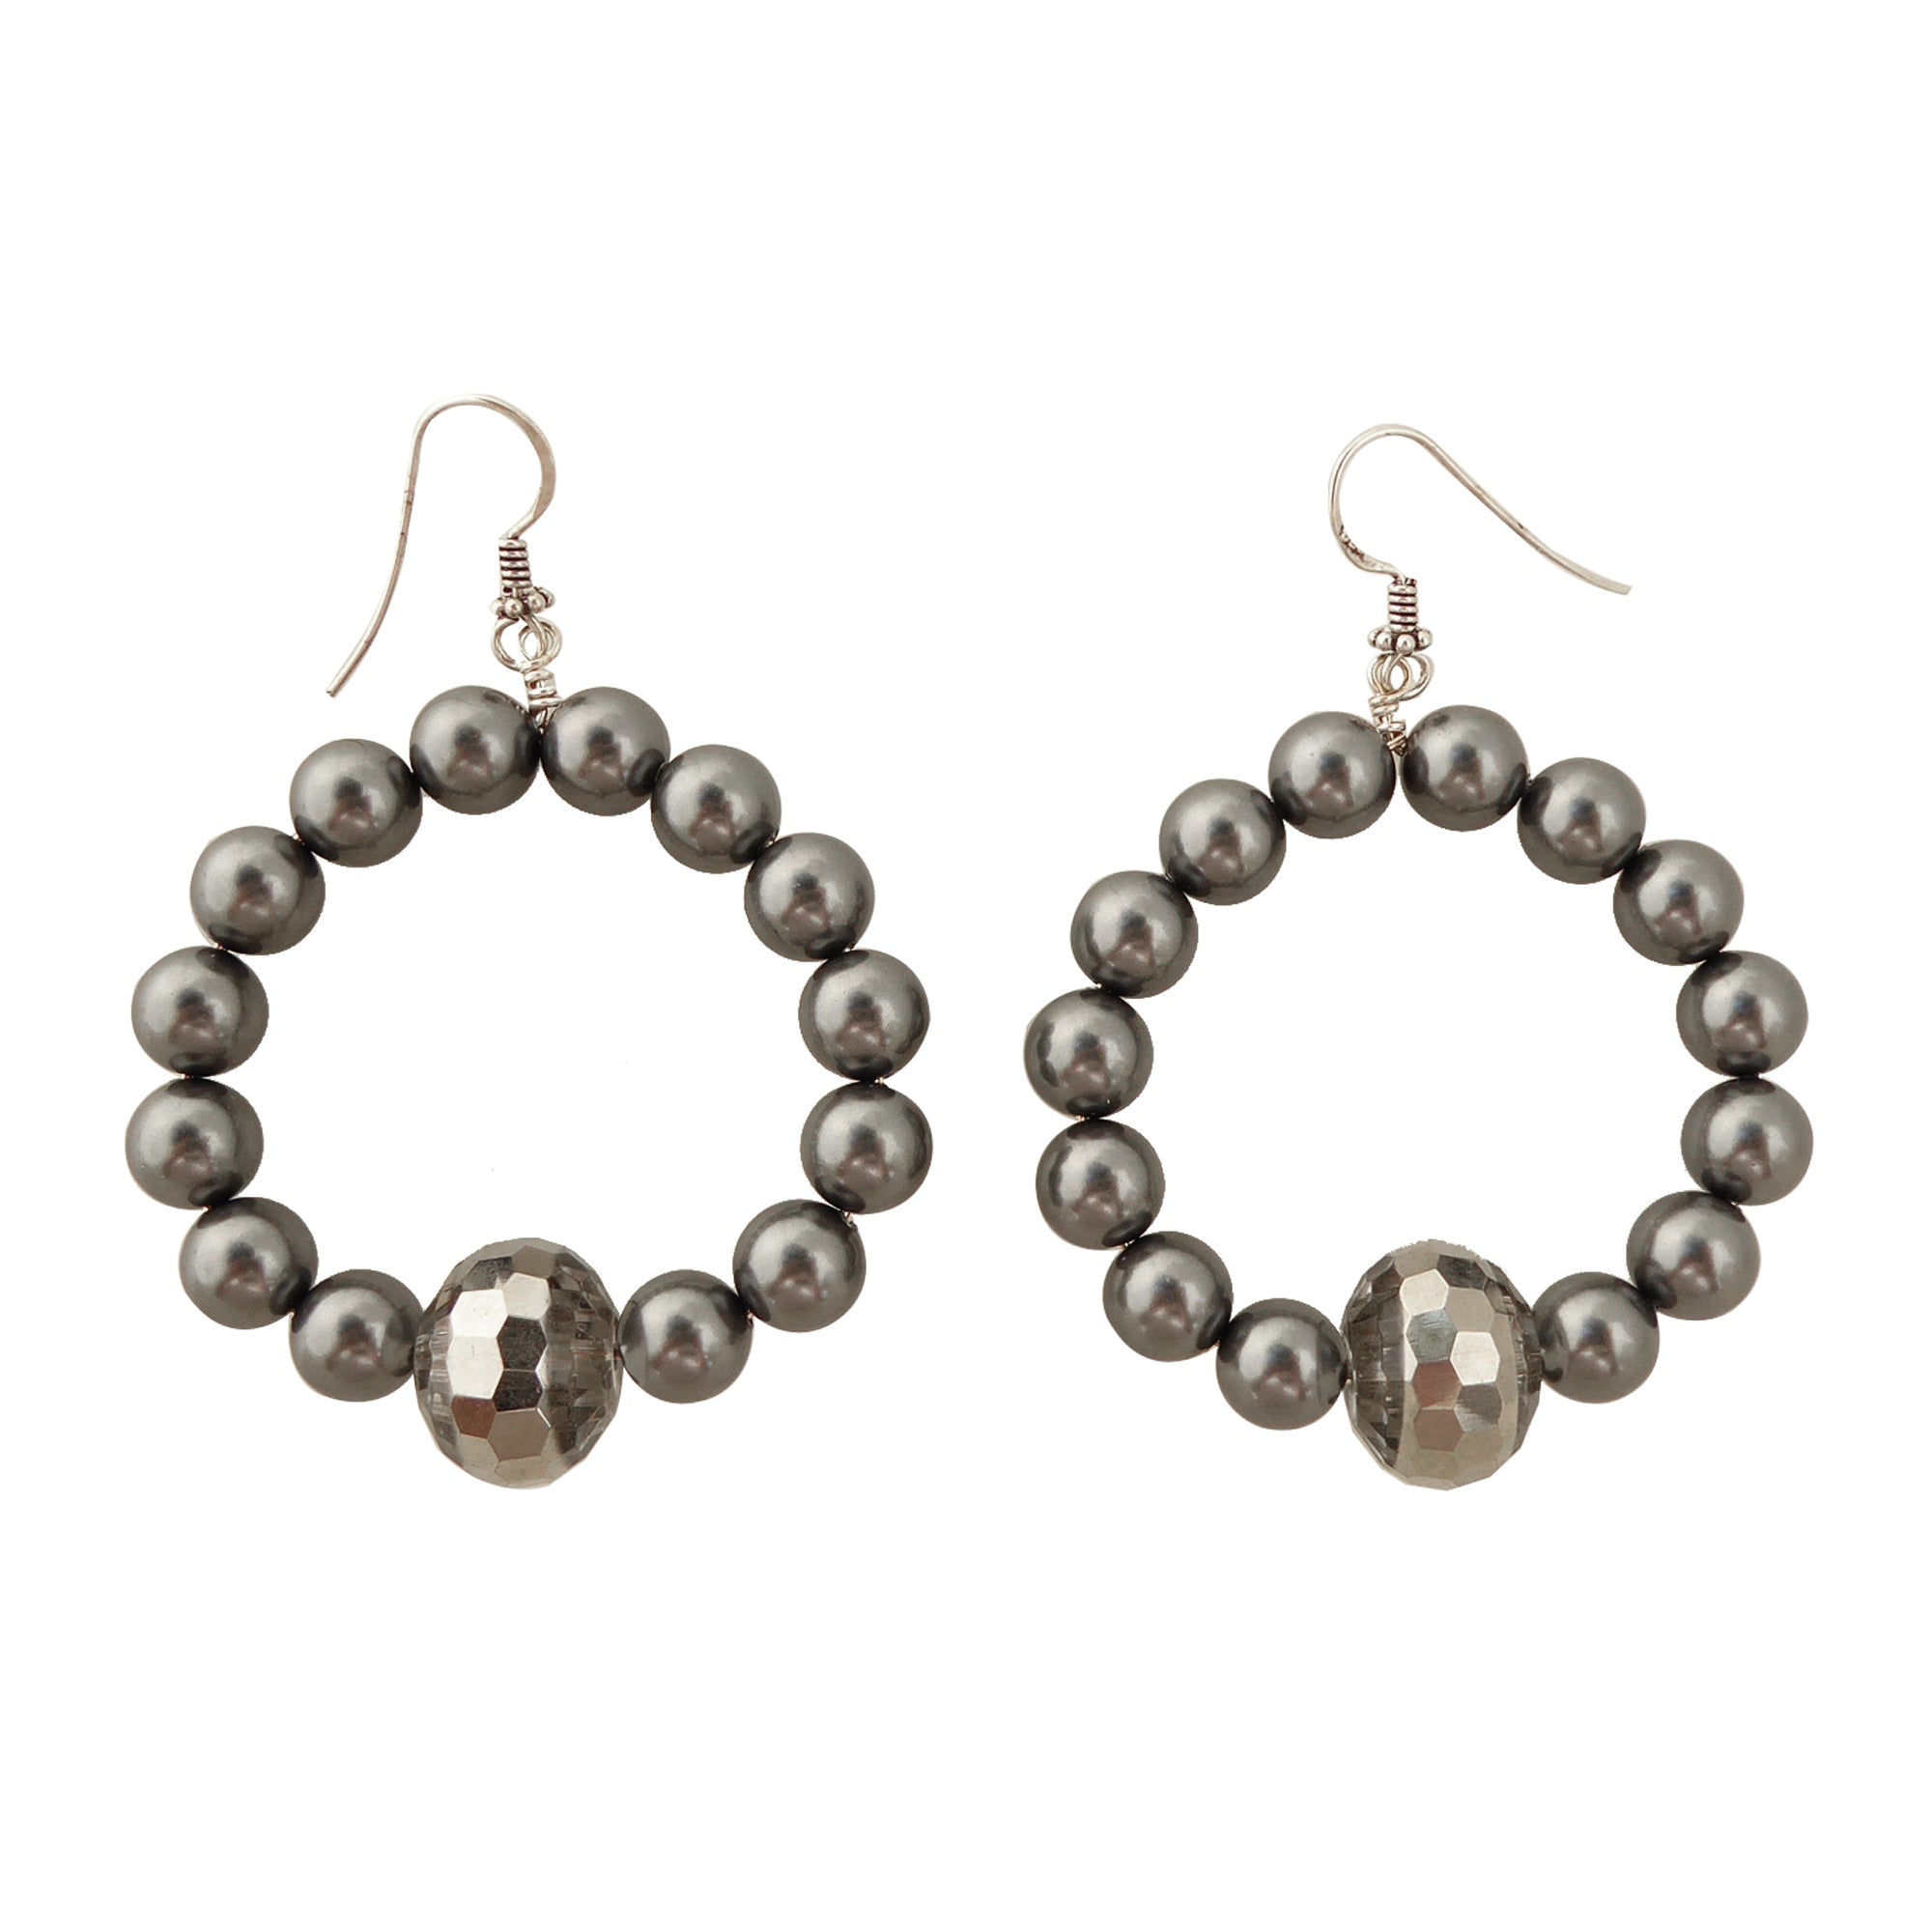    Dark gray pearl circle earrings by Jenny Dayco 1